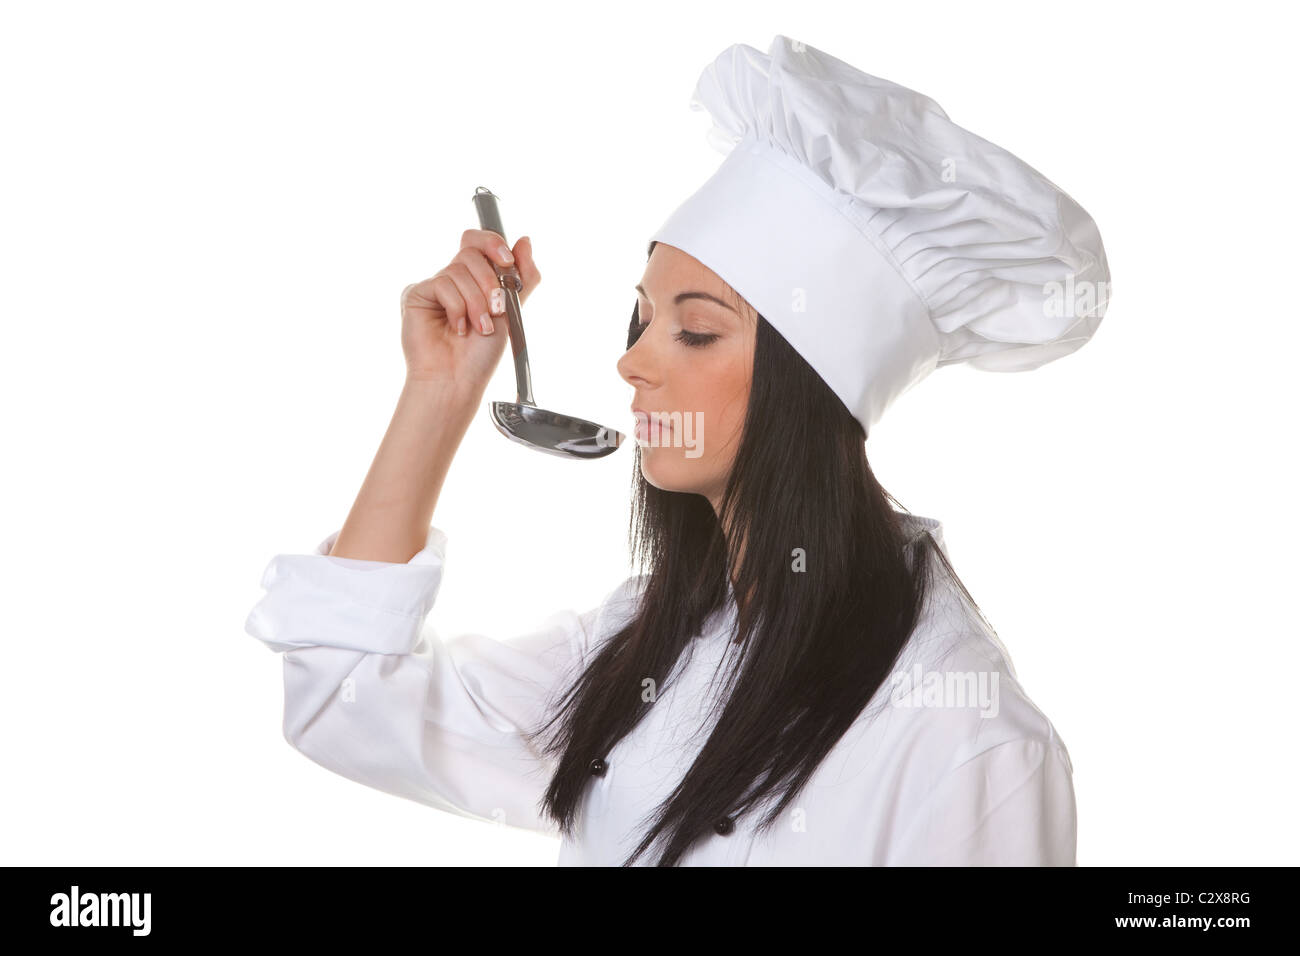 Young cook student tasting her meal Stock Photo